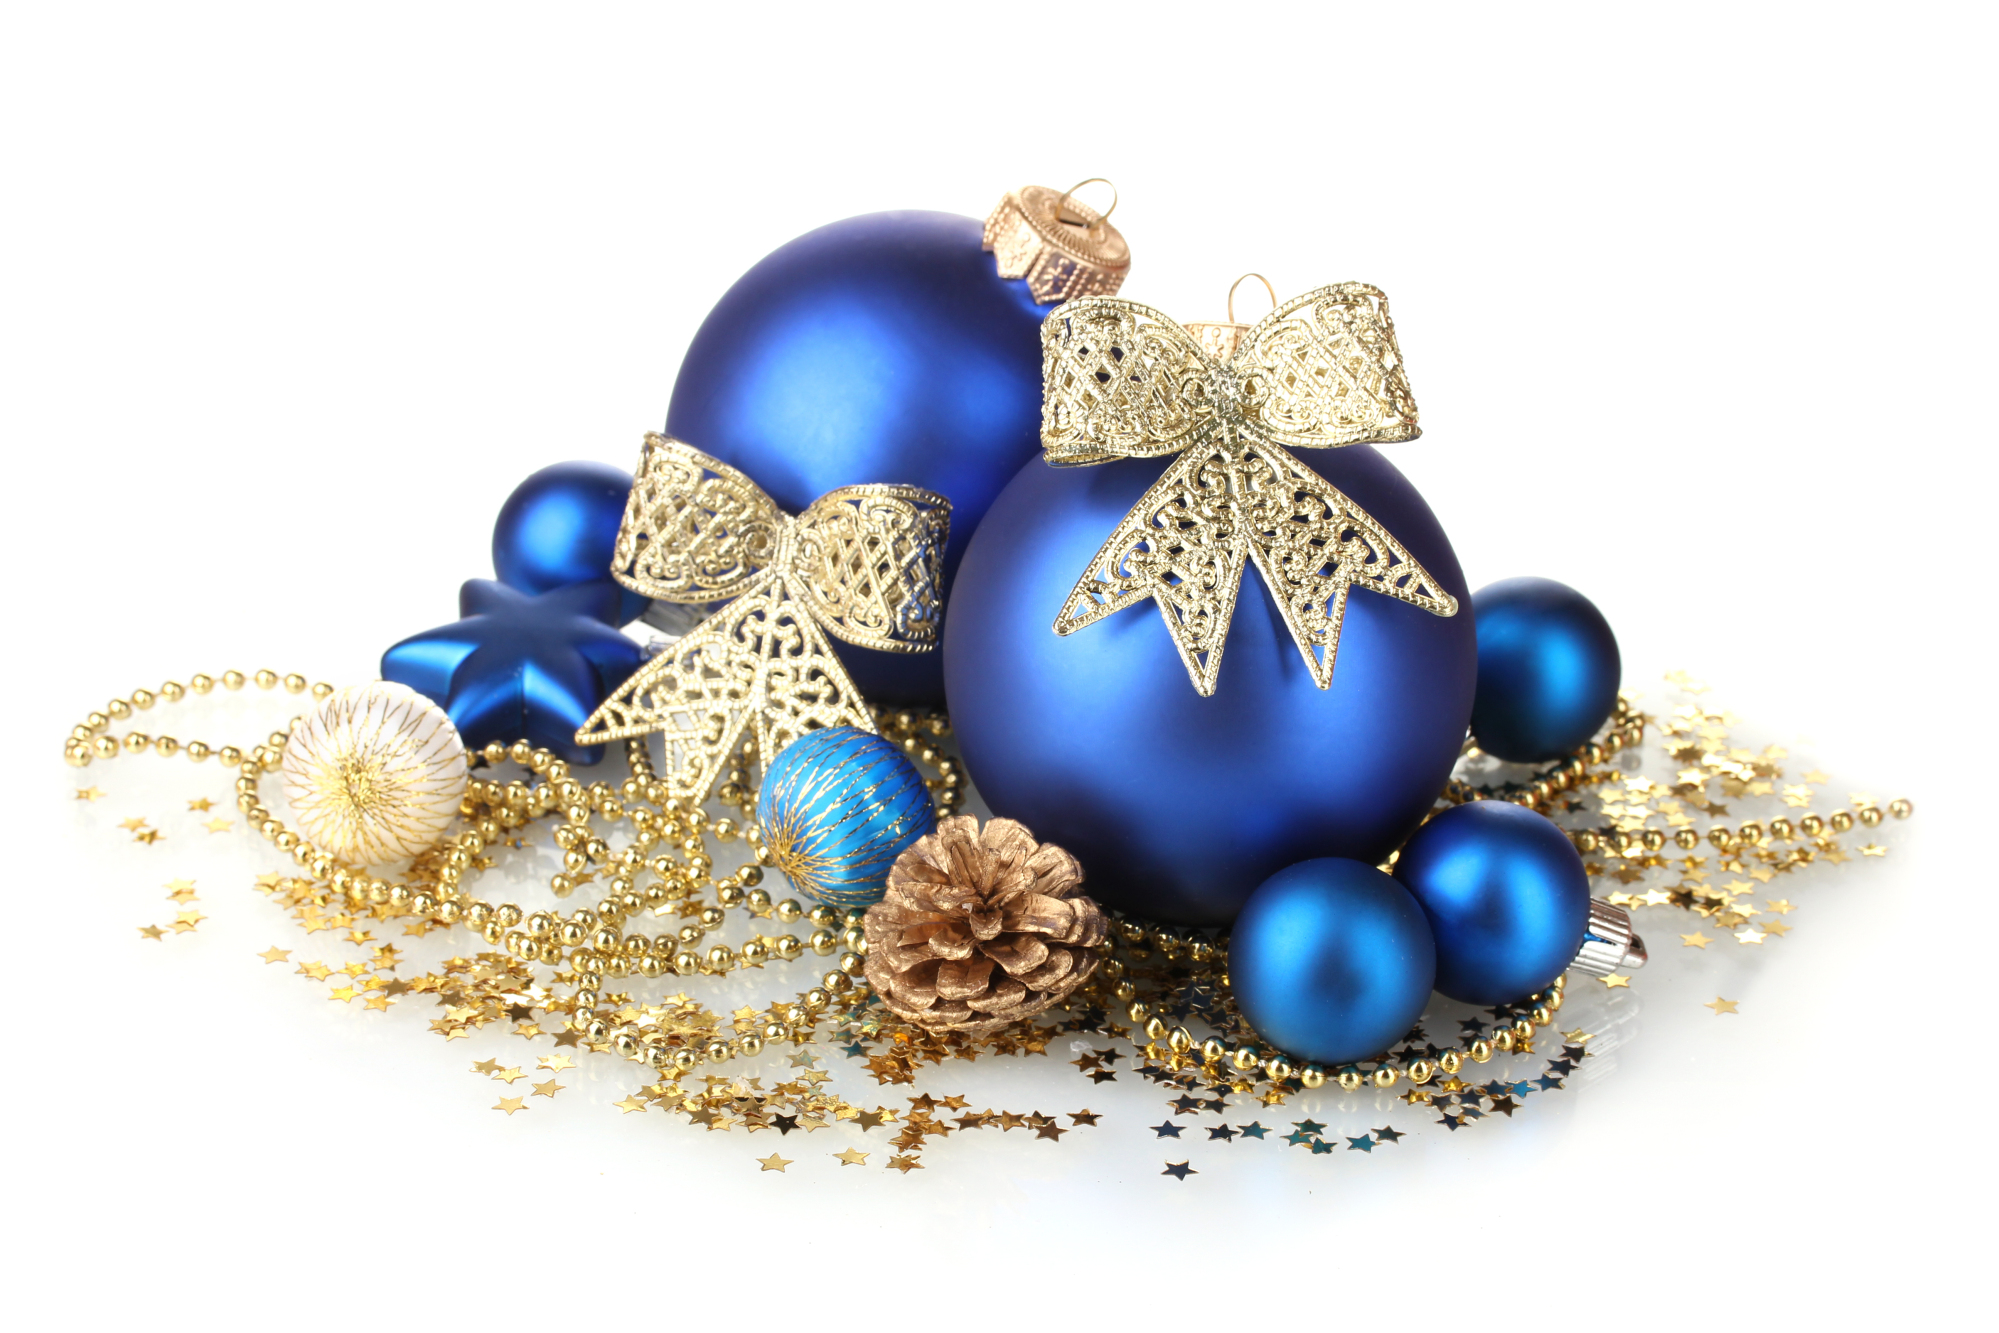 Blue and Gold Holiday Ornaments widescreen wallpaper Wide